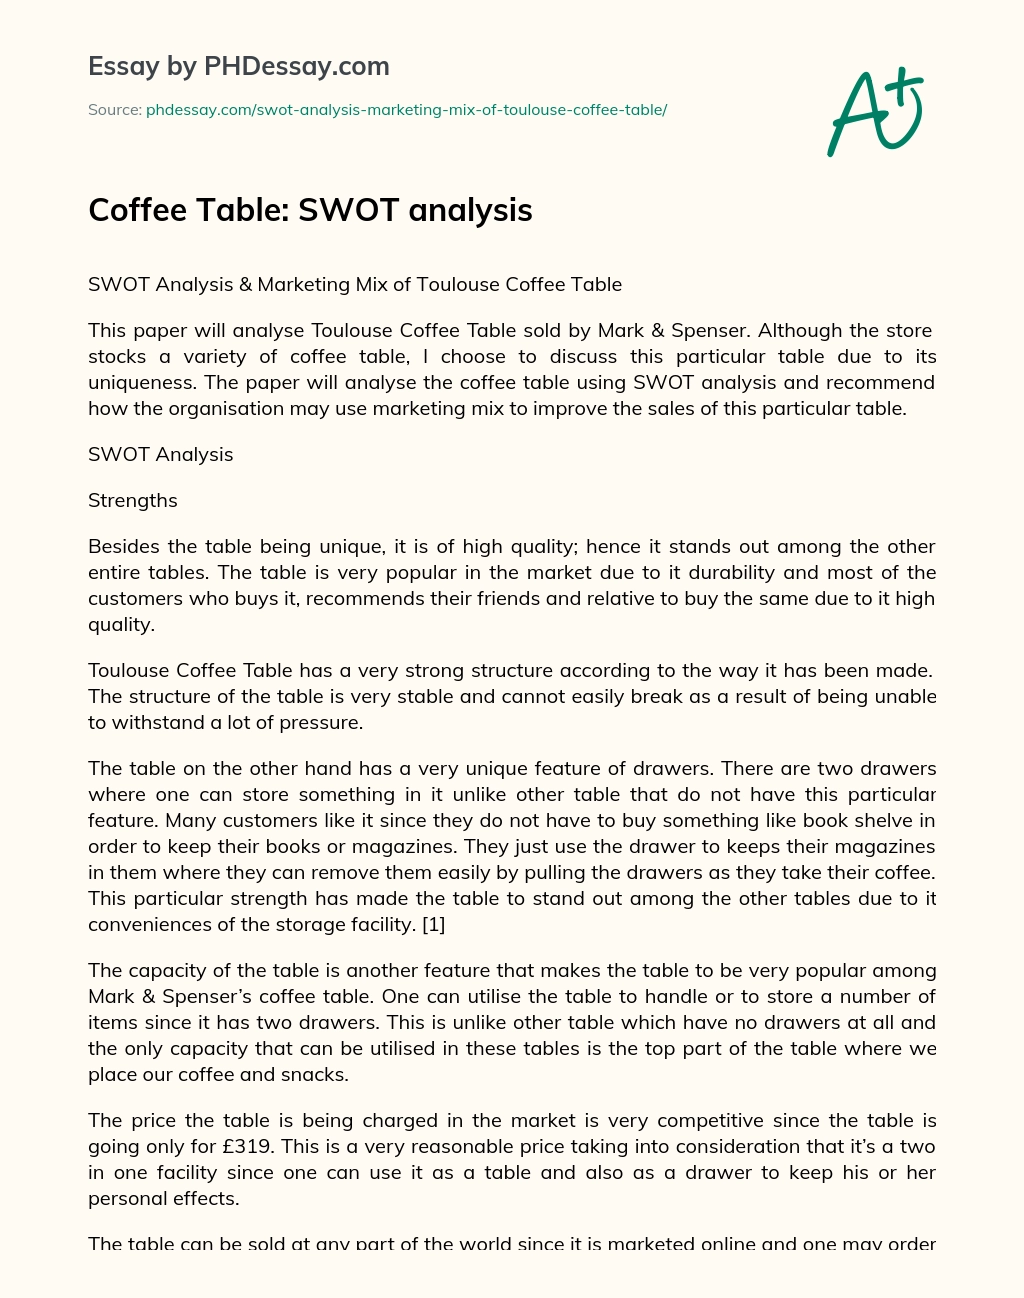 SWOT Analysis & Marketing Mix of Toulouse Coffee Table essay